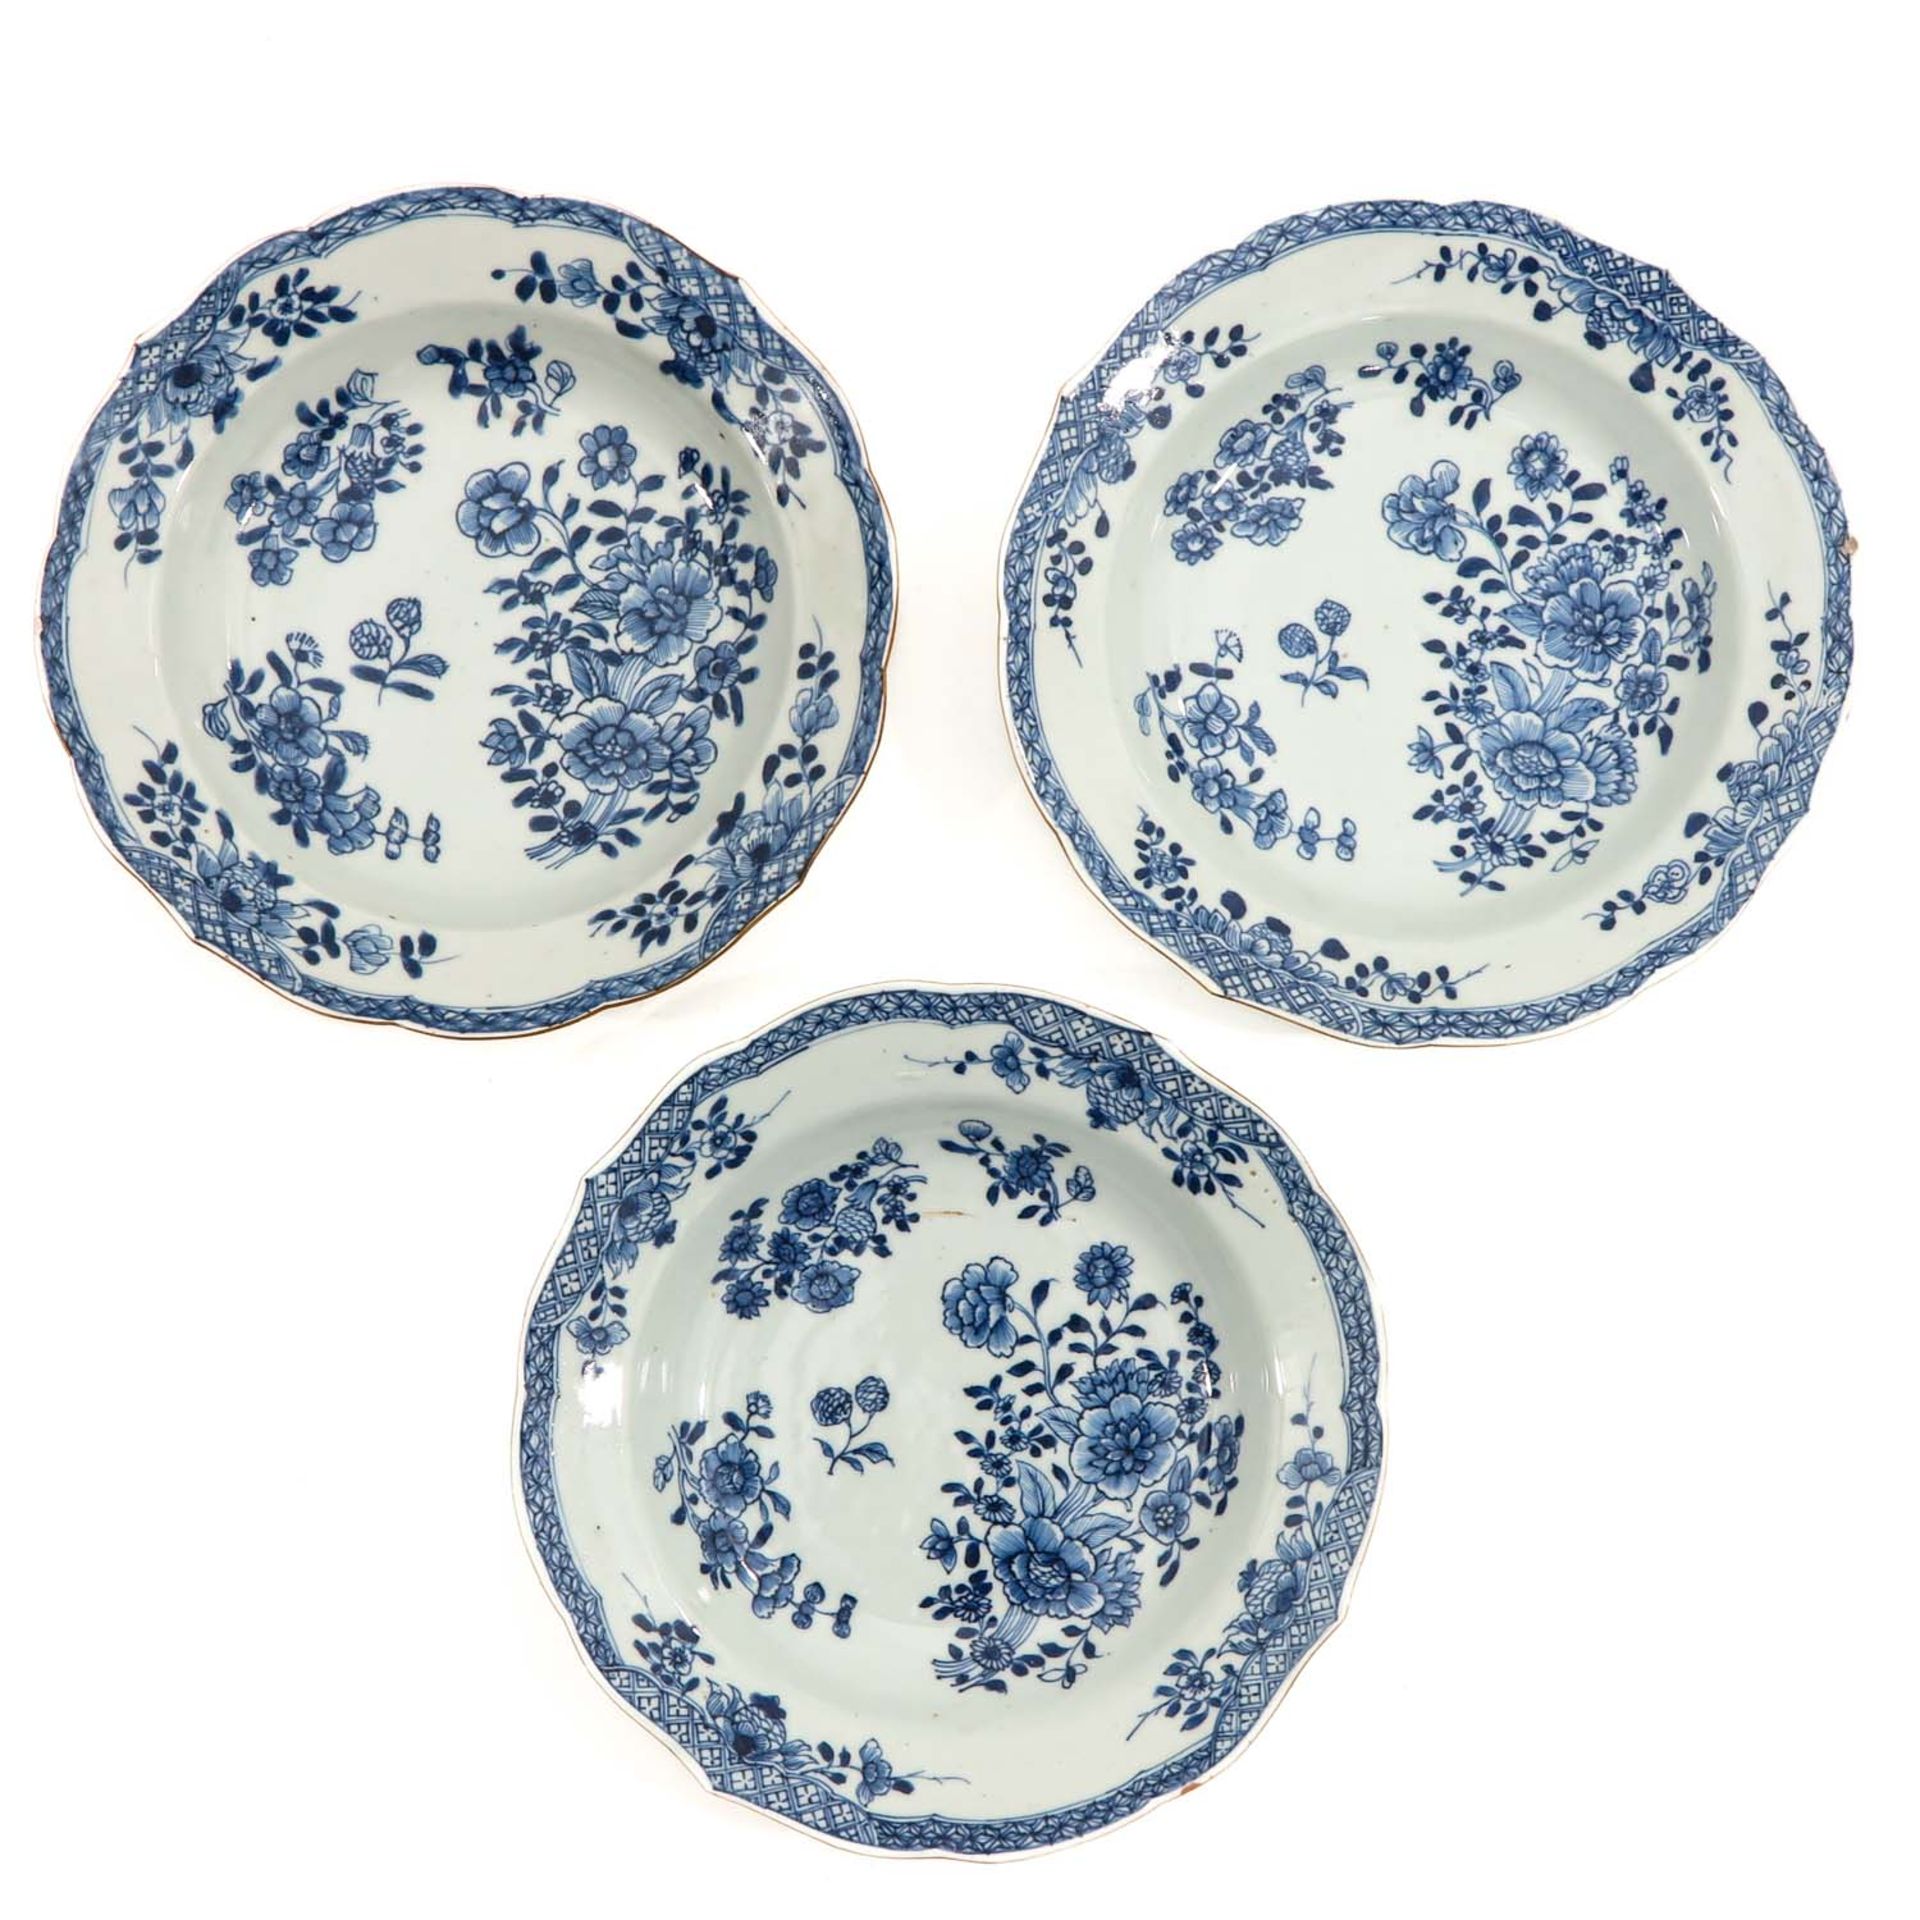 A Series of 9 Blue and White Plates - Bild 7 aus 10